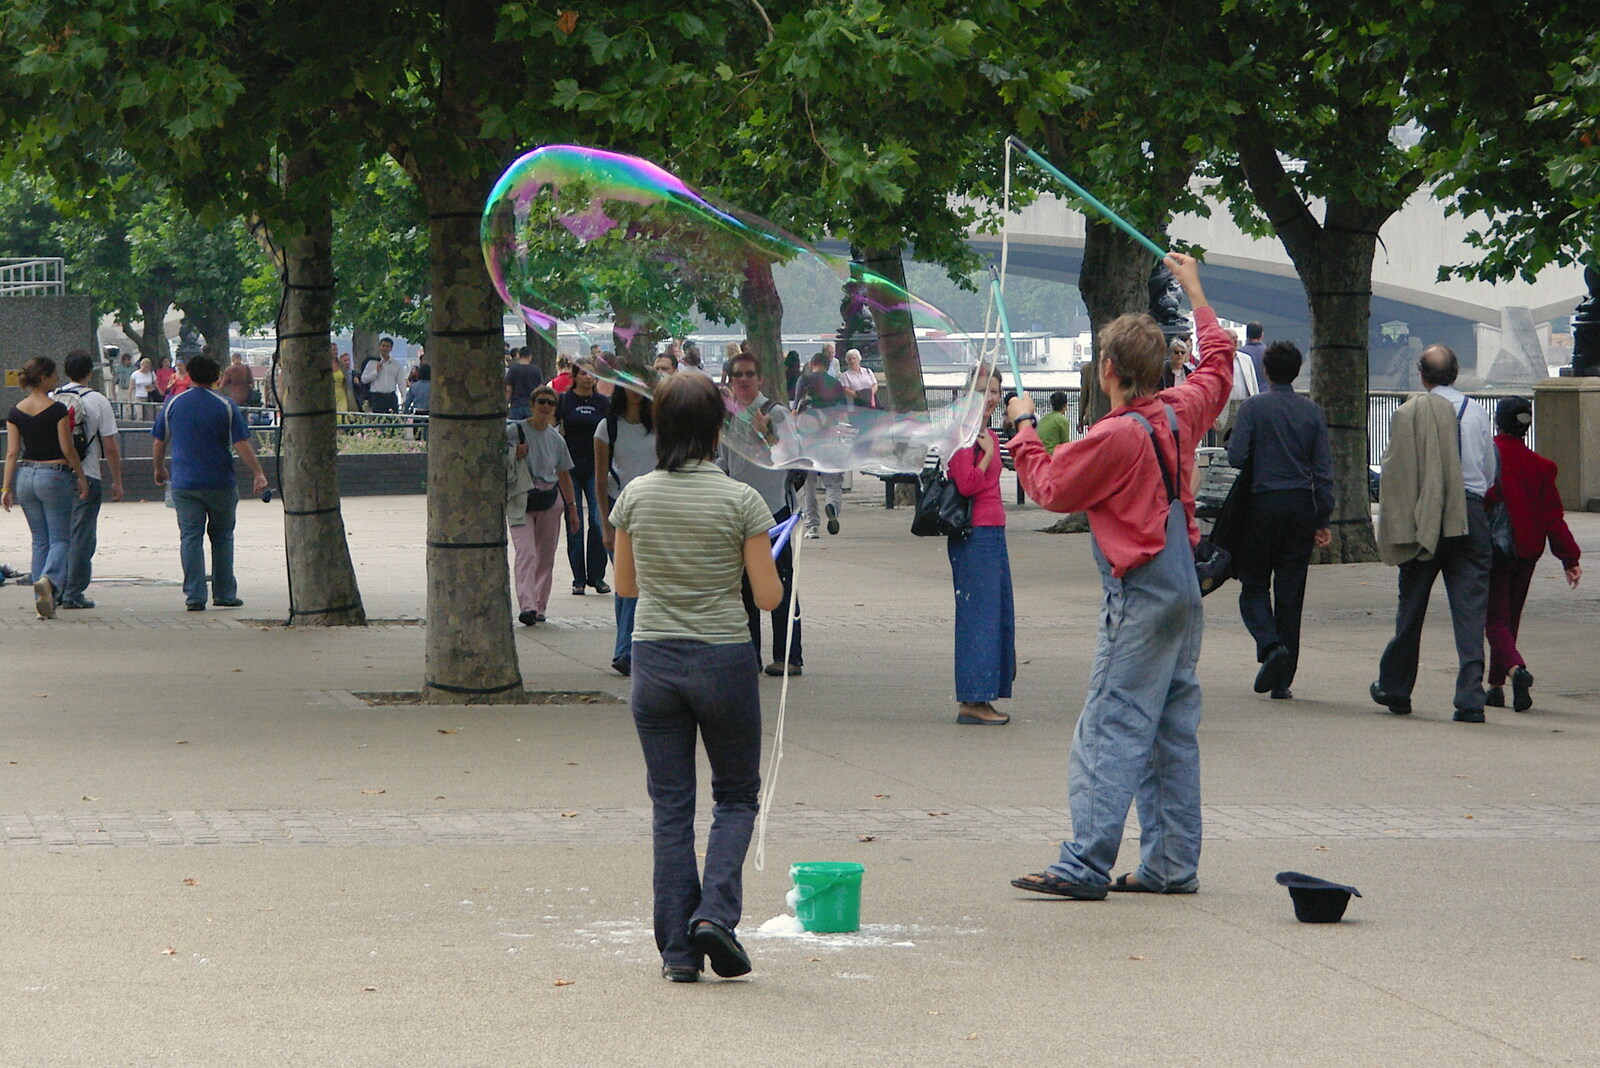 The bubble dudes near the National Theatre from Borough Market and North Clapham Tapas, London - 23rd July 2005